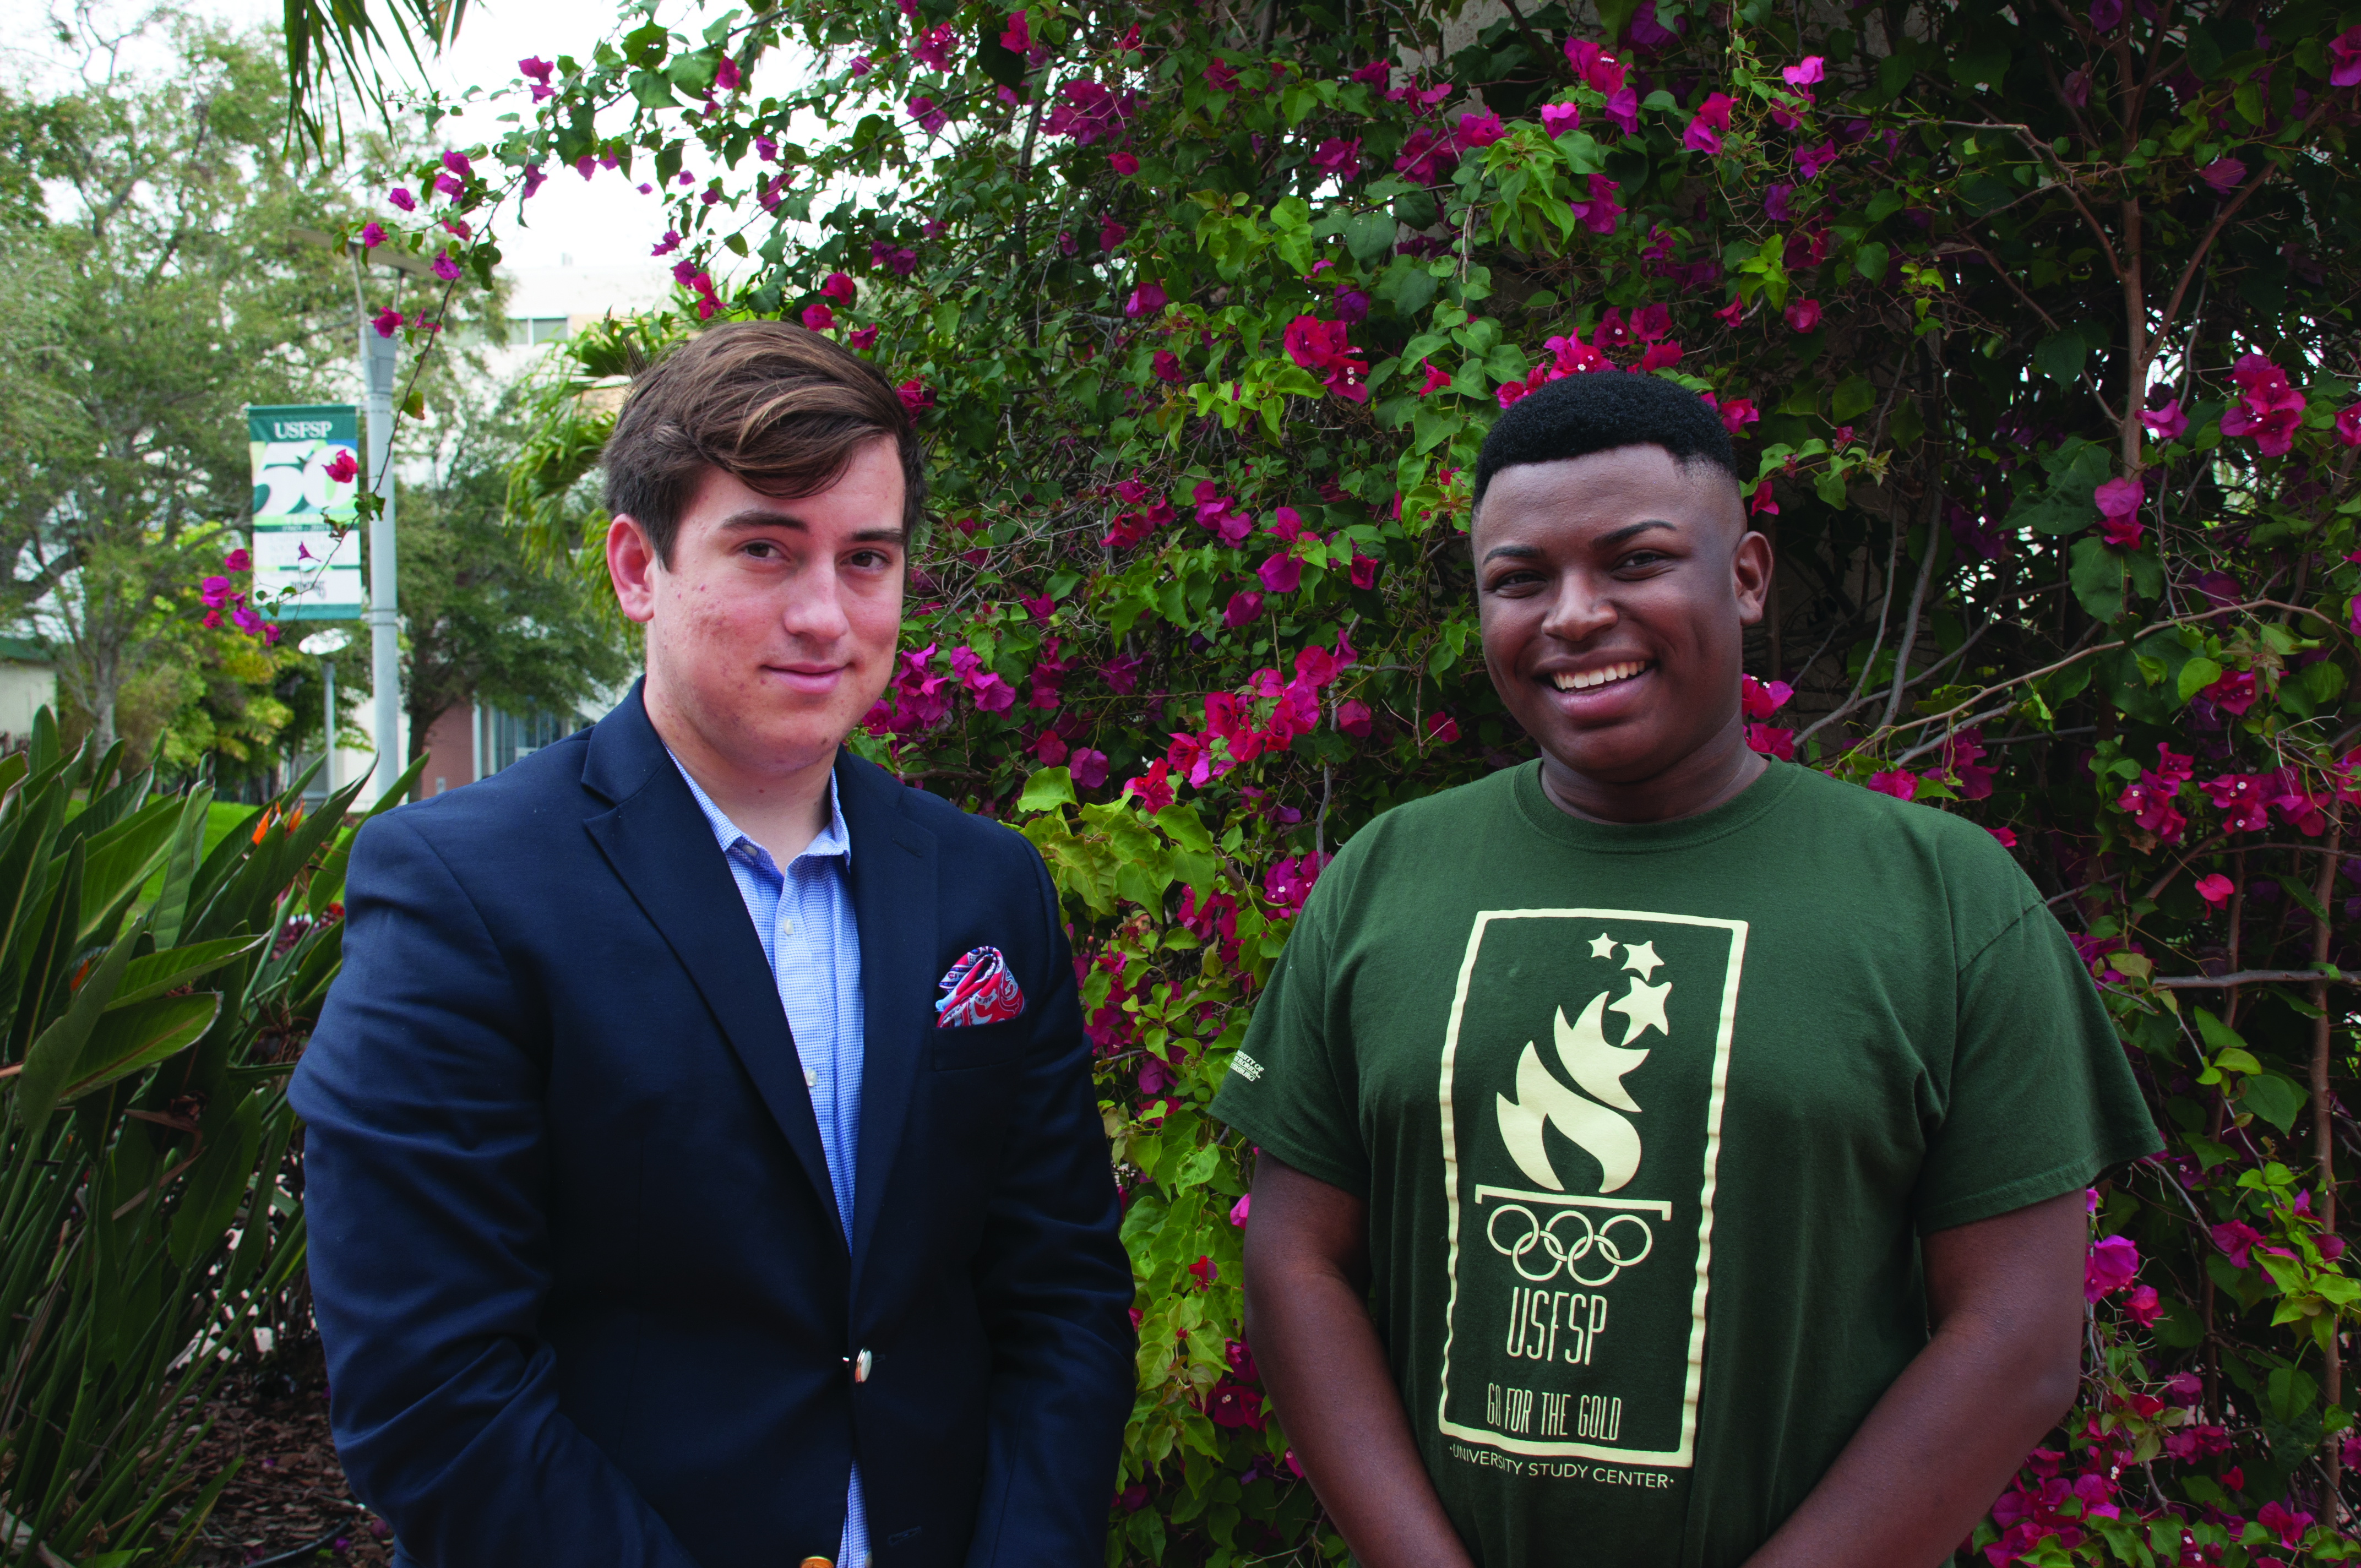 Highest Paid: David Thompson (right), student body president, poses with Sam Goetz, the vice president. They are the highest paid members of SG.